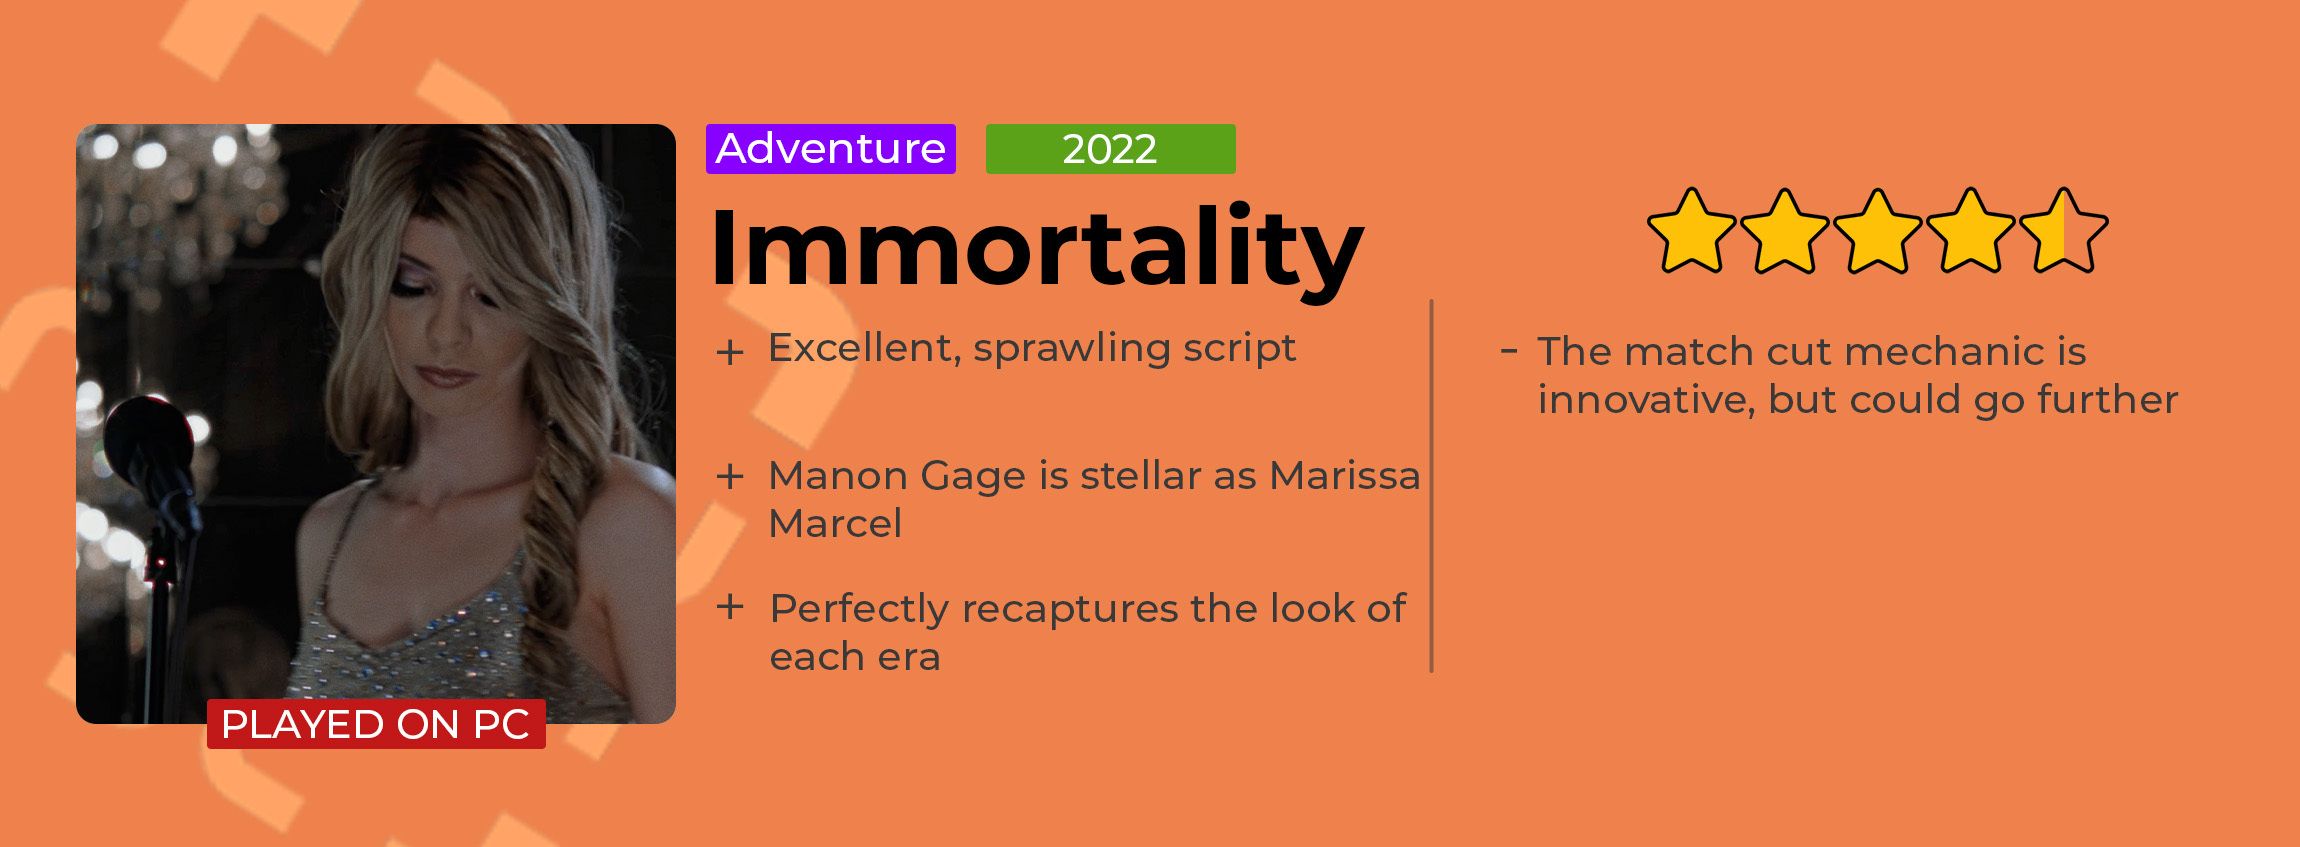 Immortality Review Card